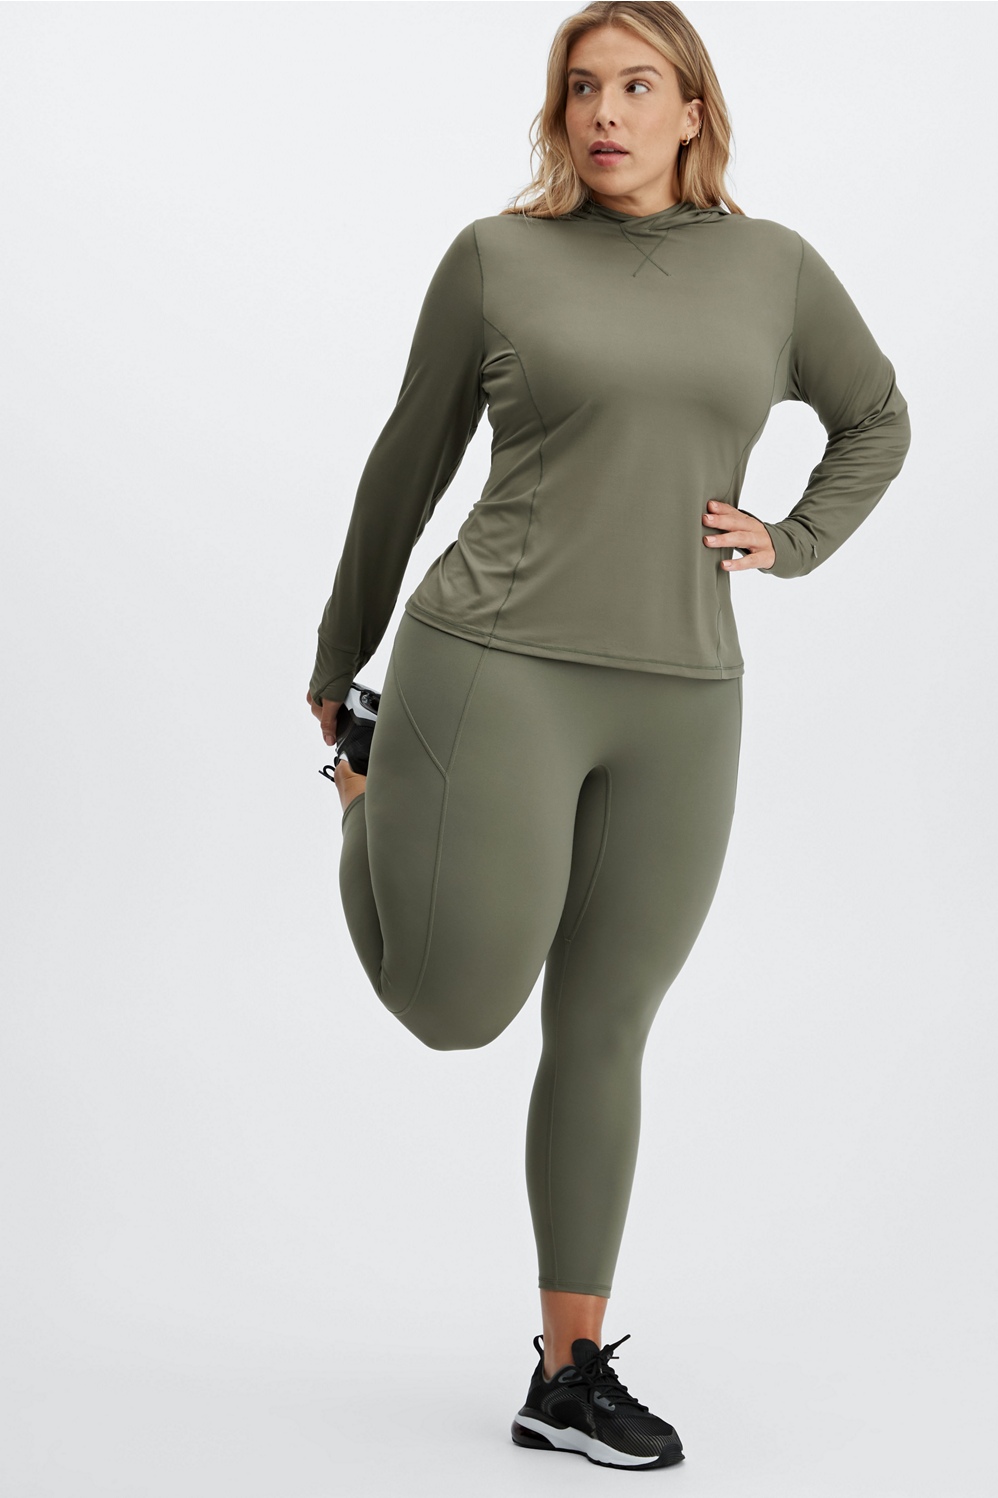 Athletic Leggings By Cme Size: S – Clothes Mentor Fishers IN #242